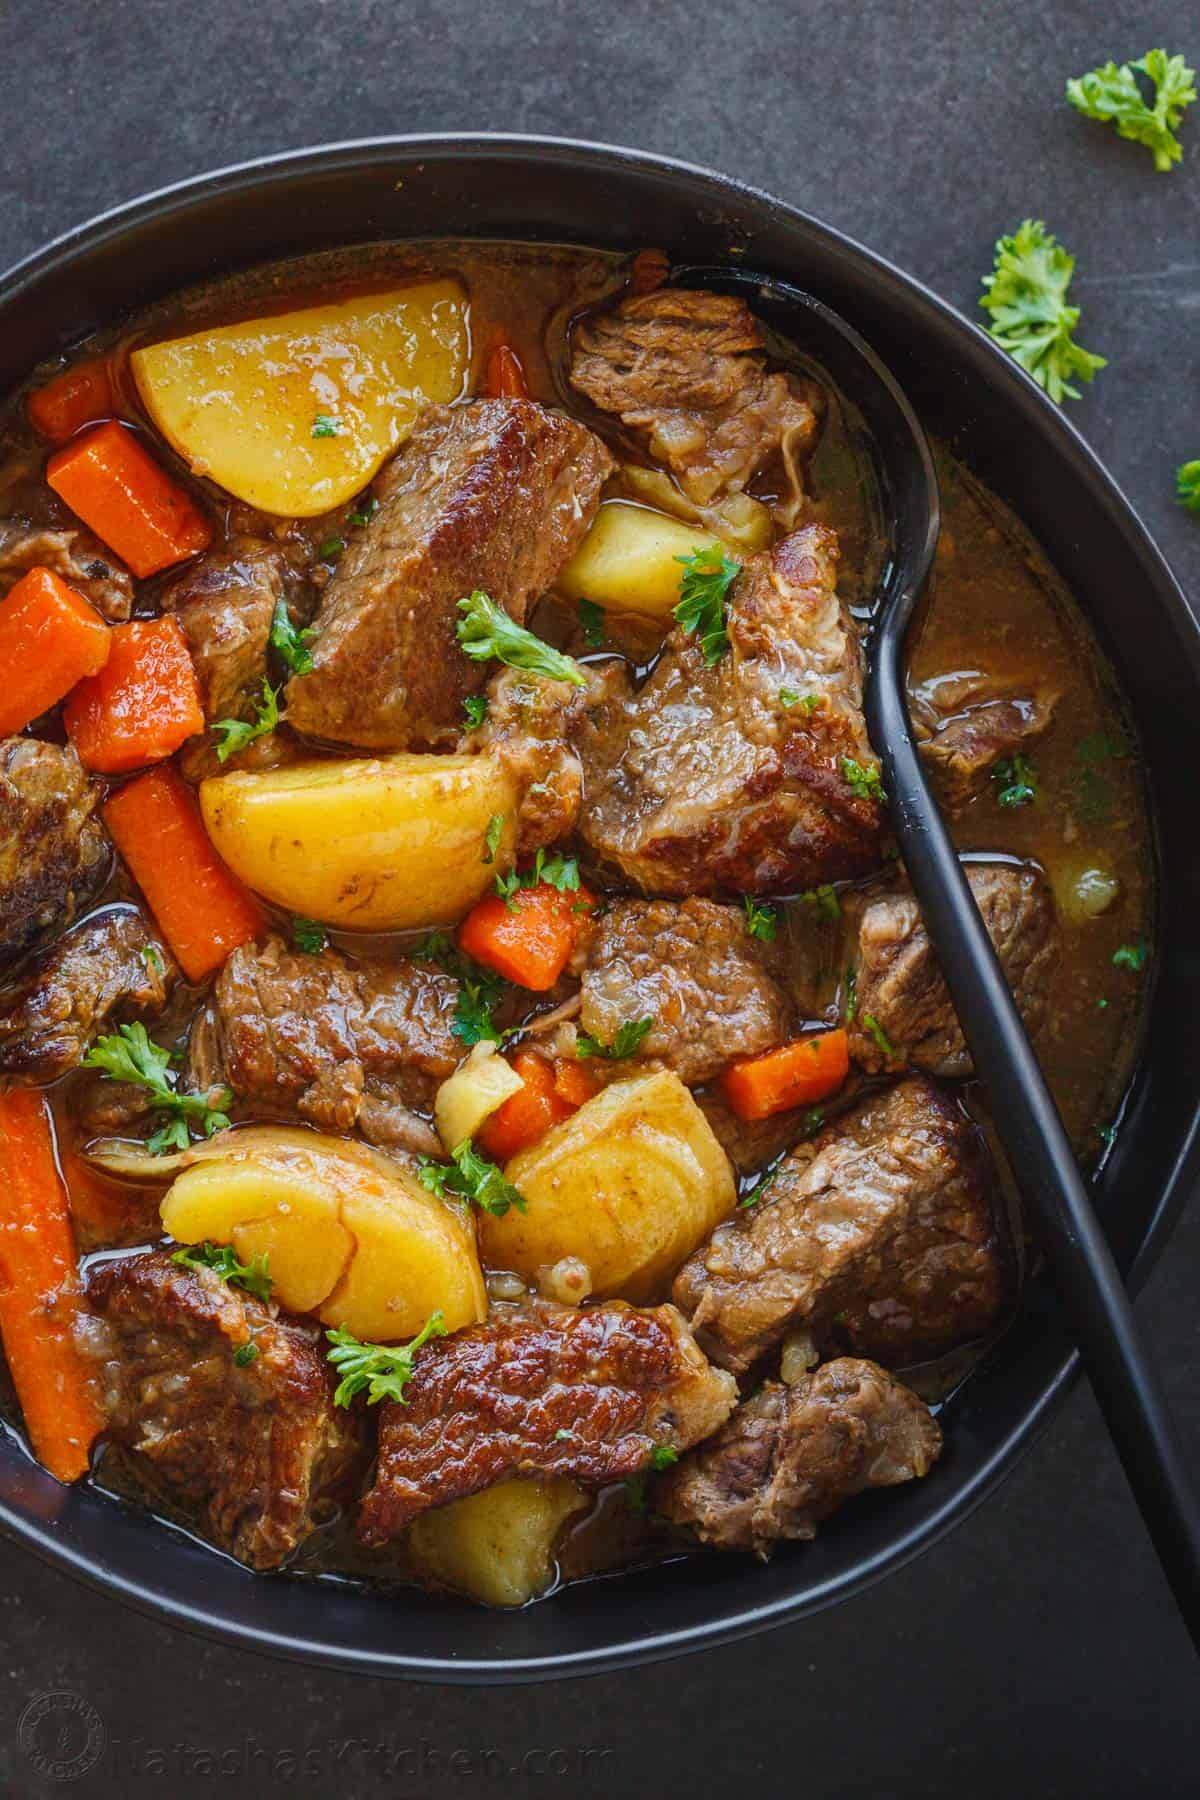 healthy slow cooker beef stew in a black bowl with a black spoon on a dark gray surface - one of the recipes for this week's healthy weekly meal plan